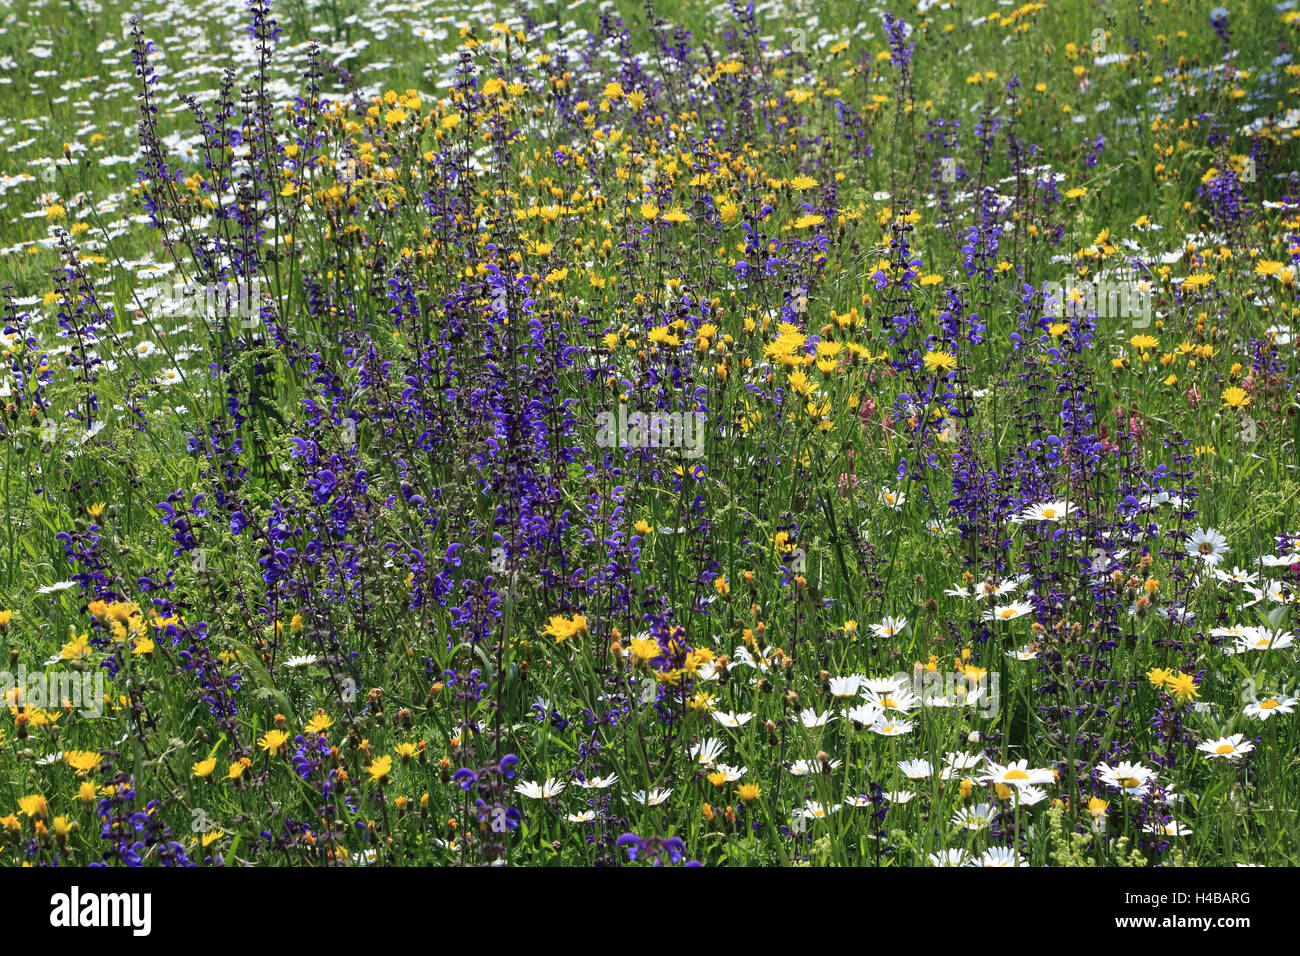 Flower meadow in spring Stock Photo